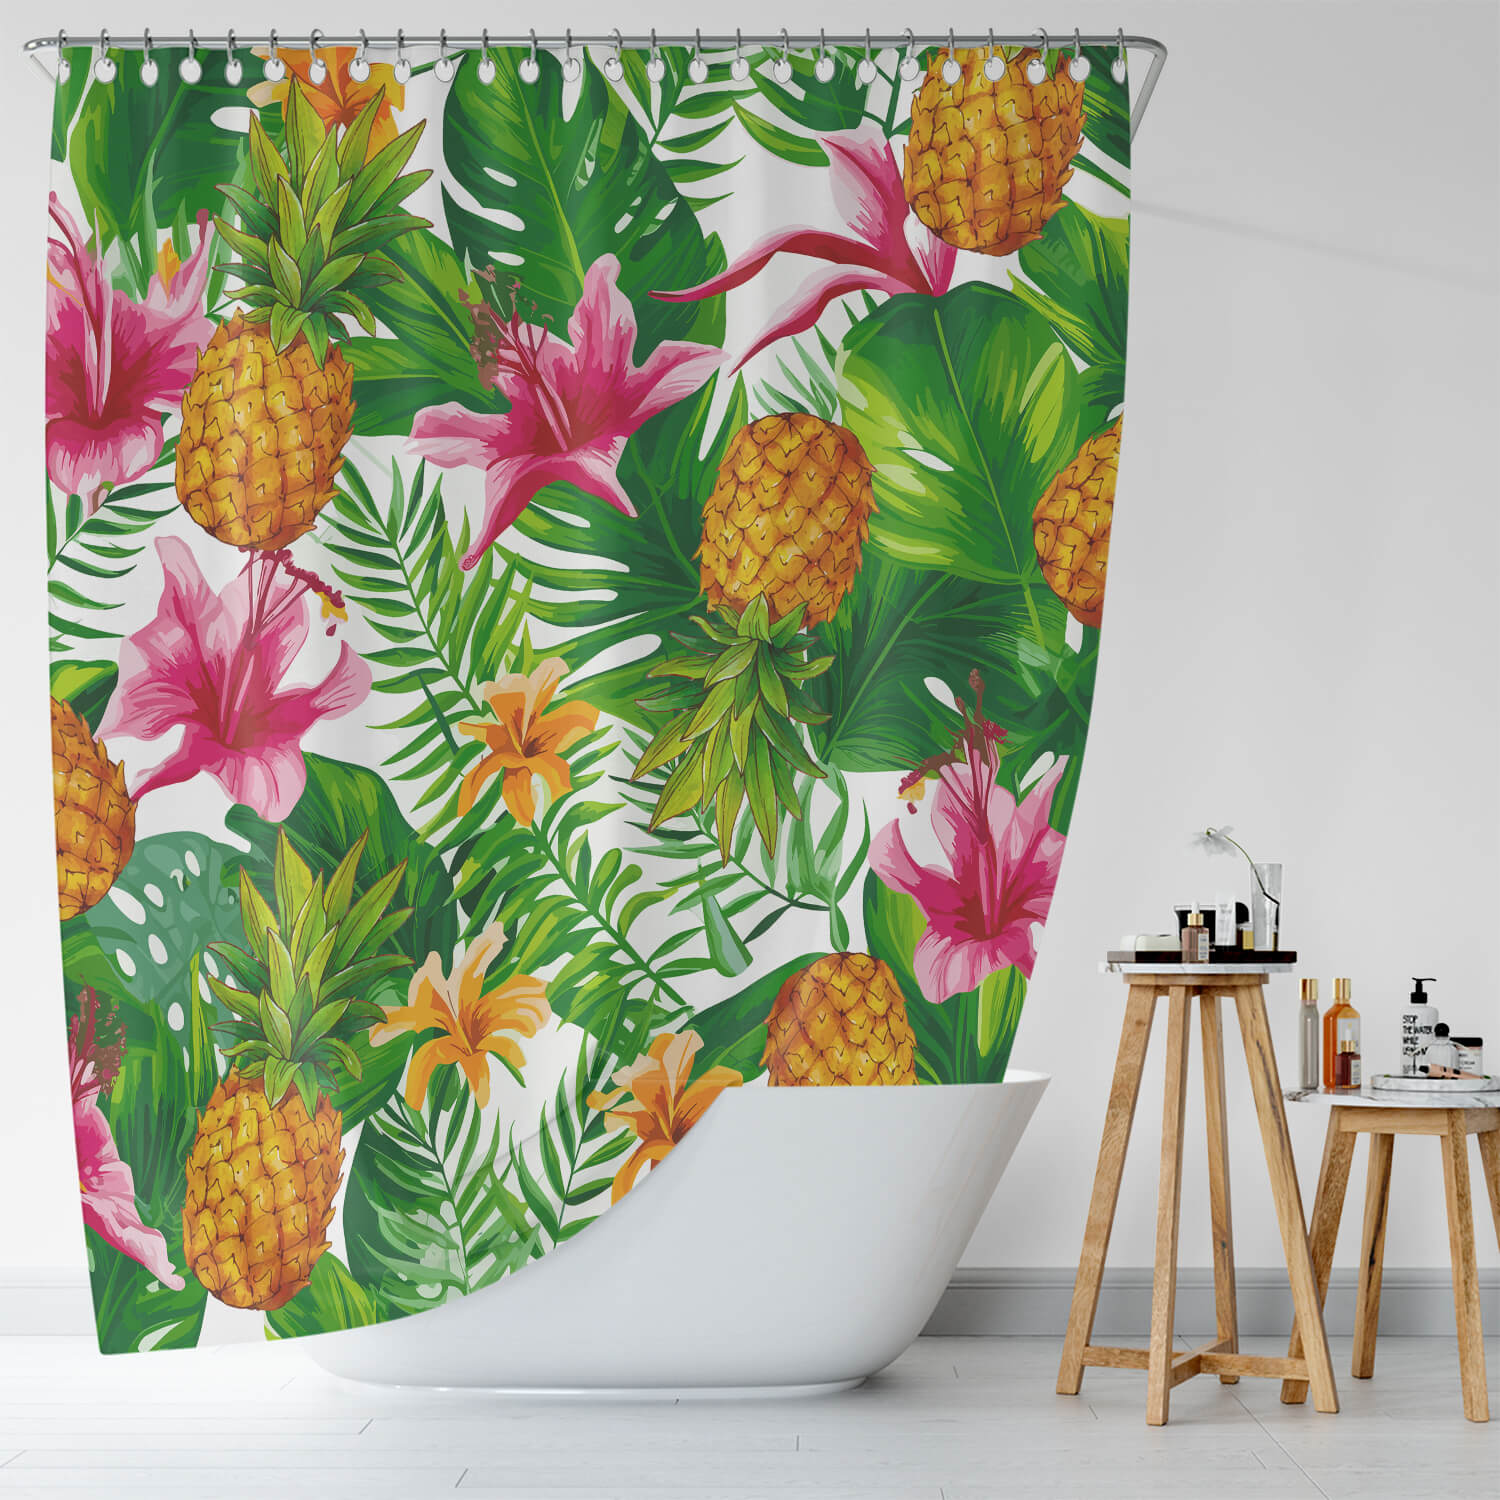 Transform your bathroom into a tropical oasis with the Tropical Pineapple Shower Curtain-Cottoncat by Cotton Cat featuring vibrant lilies. Refresh and update your bathroom decor instantly with this eye-catching Tropical Pineapple Shower Curtain-Cottoncat.